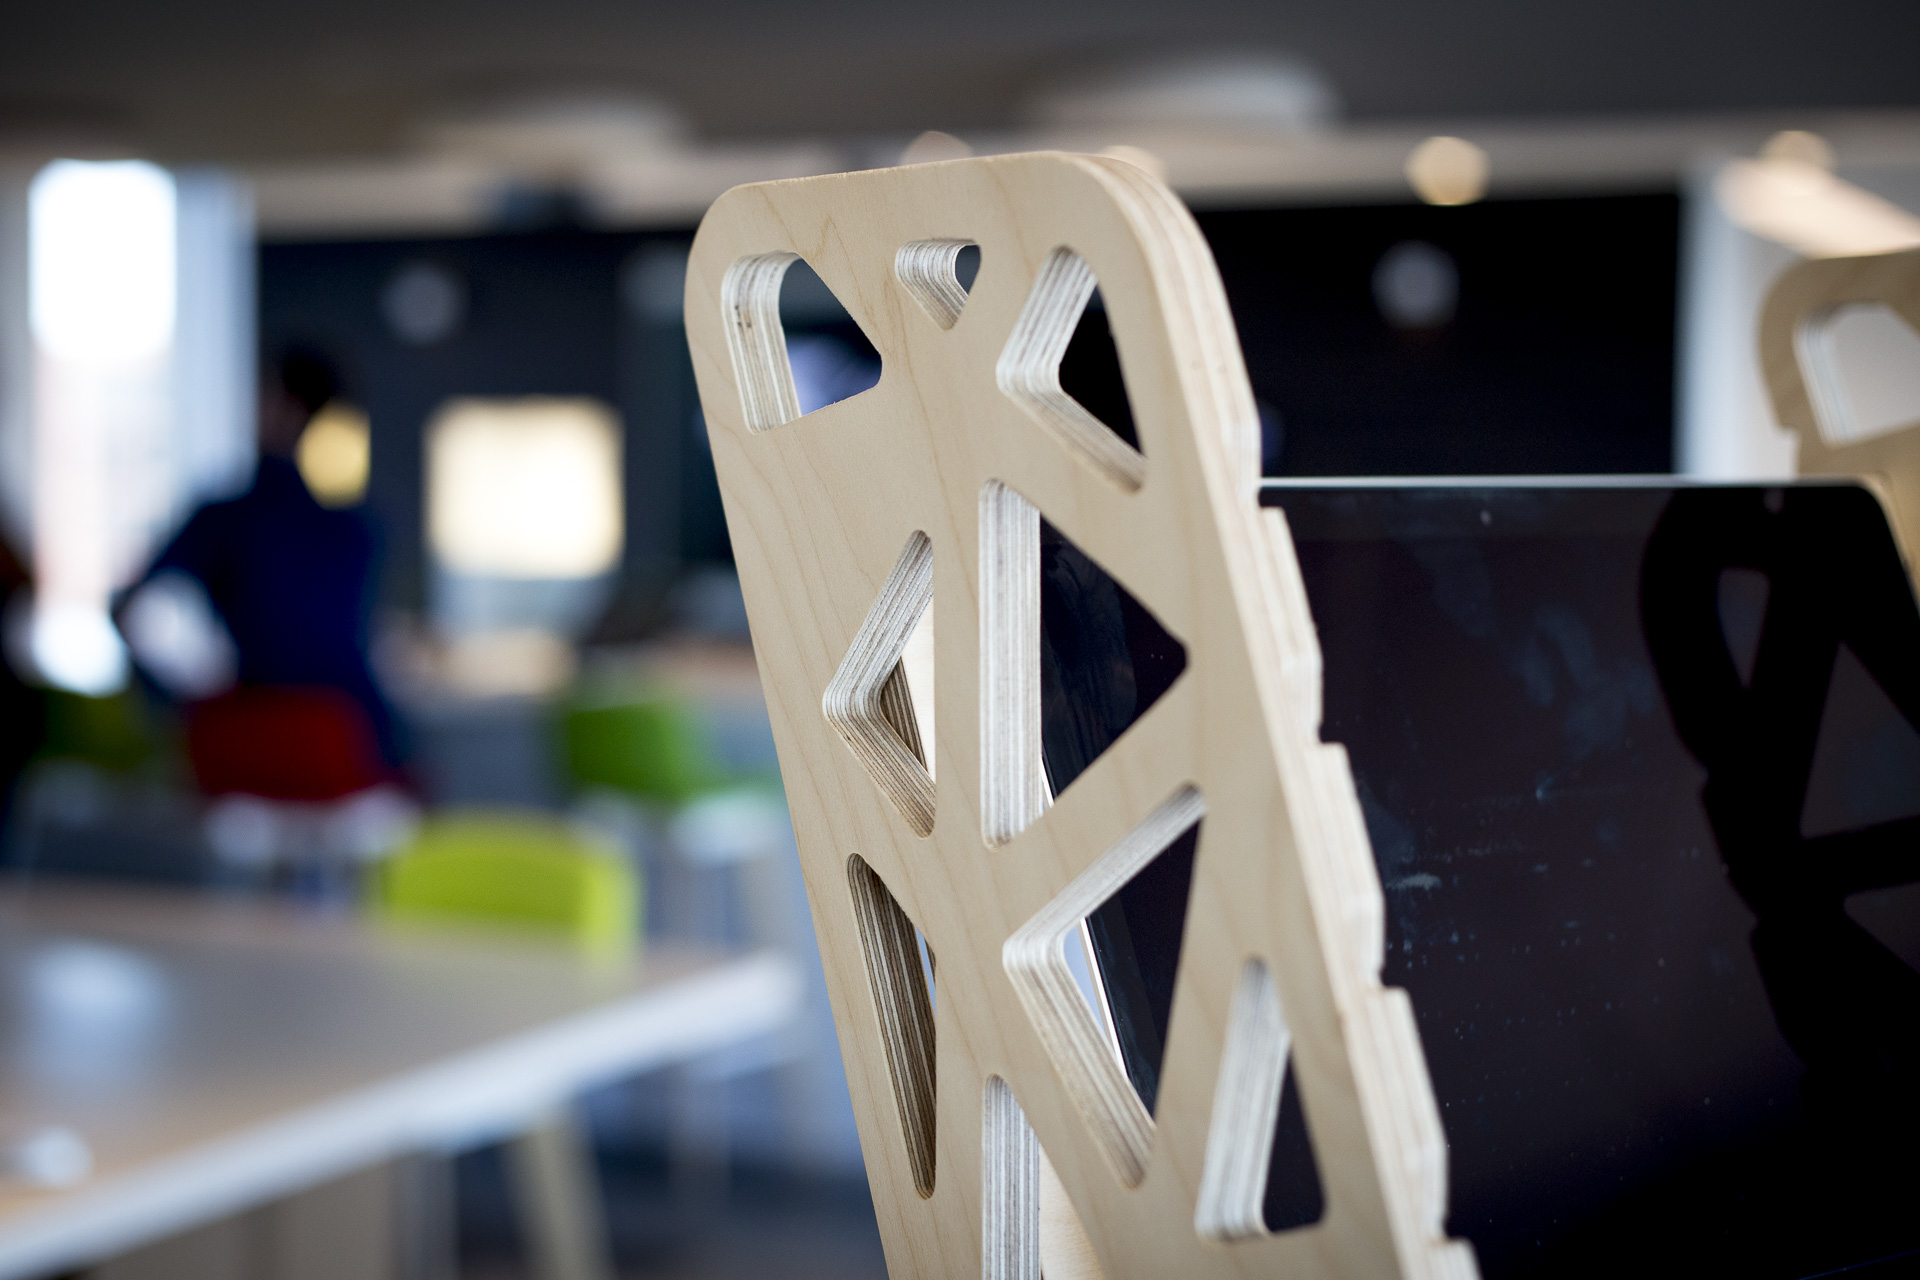 Detail of our wooden standing desk the S-Desk Voro